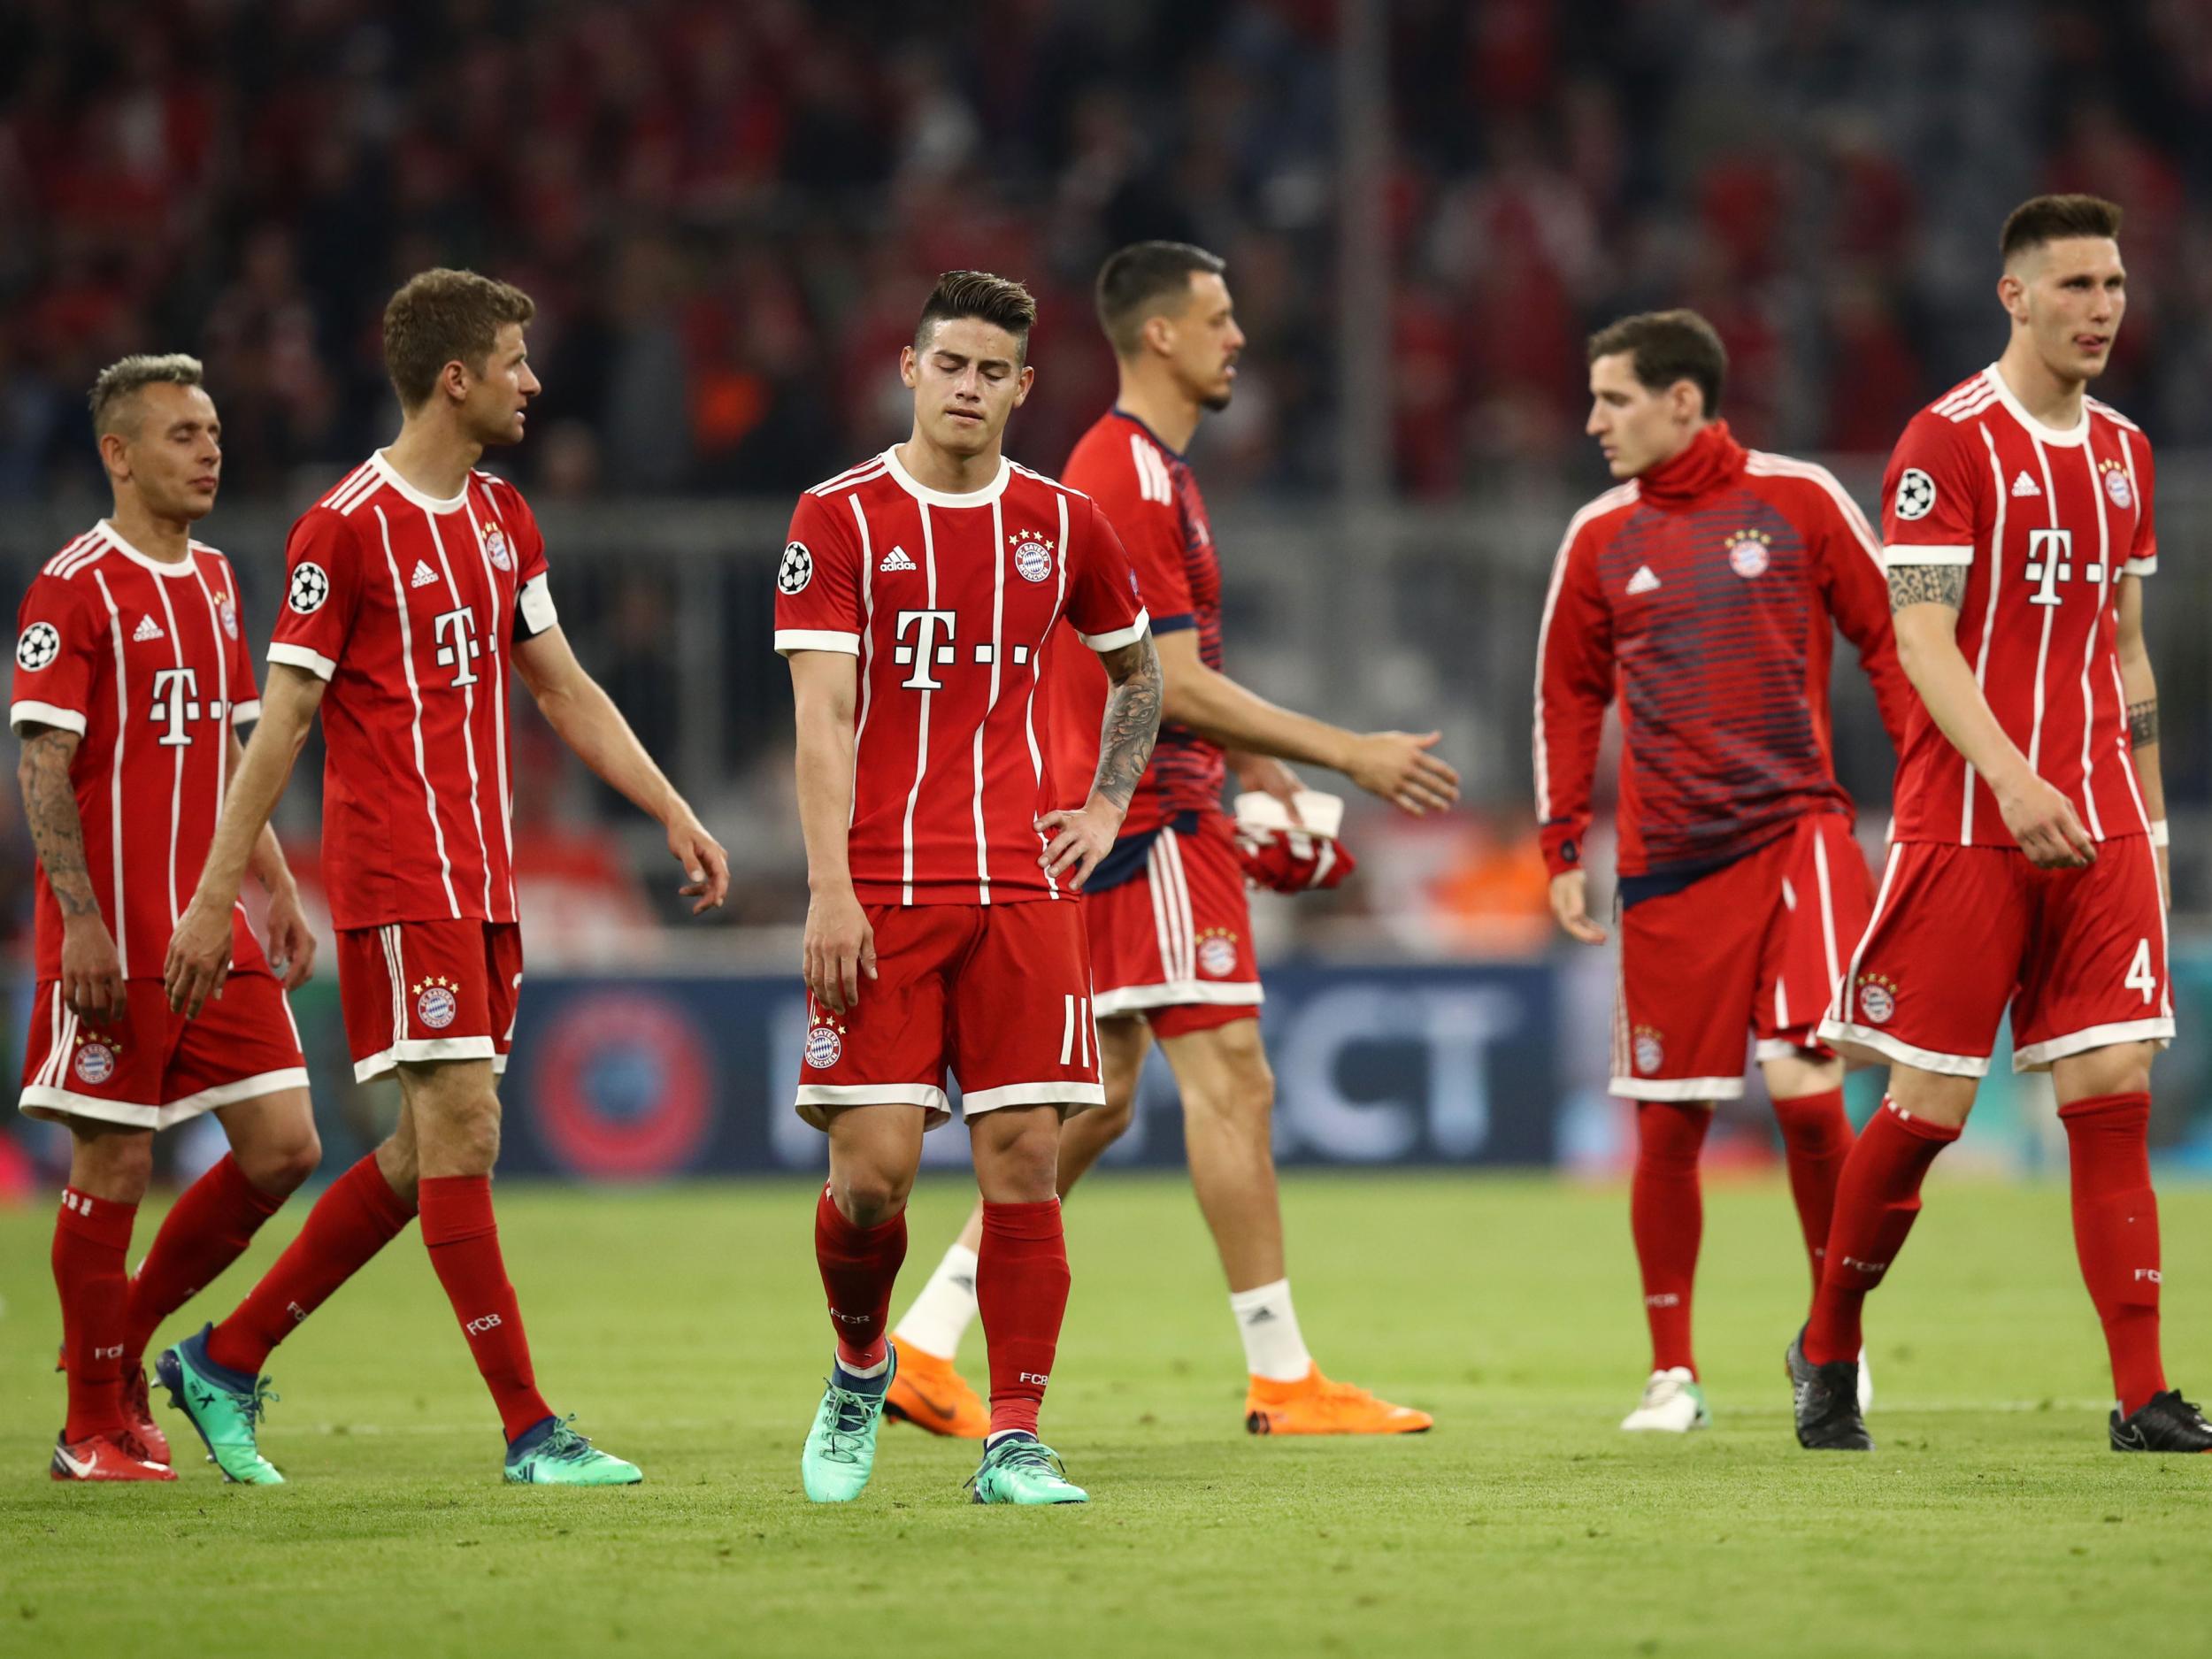 Bayern Munich were made to pay for their profligacy